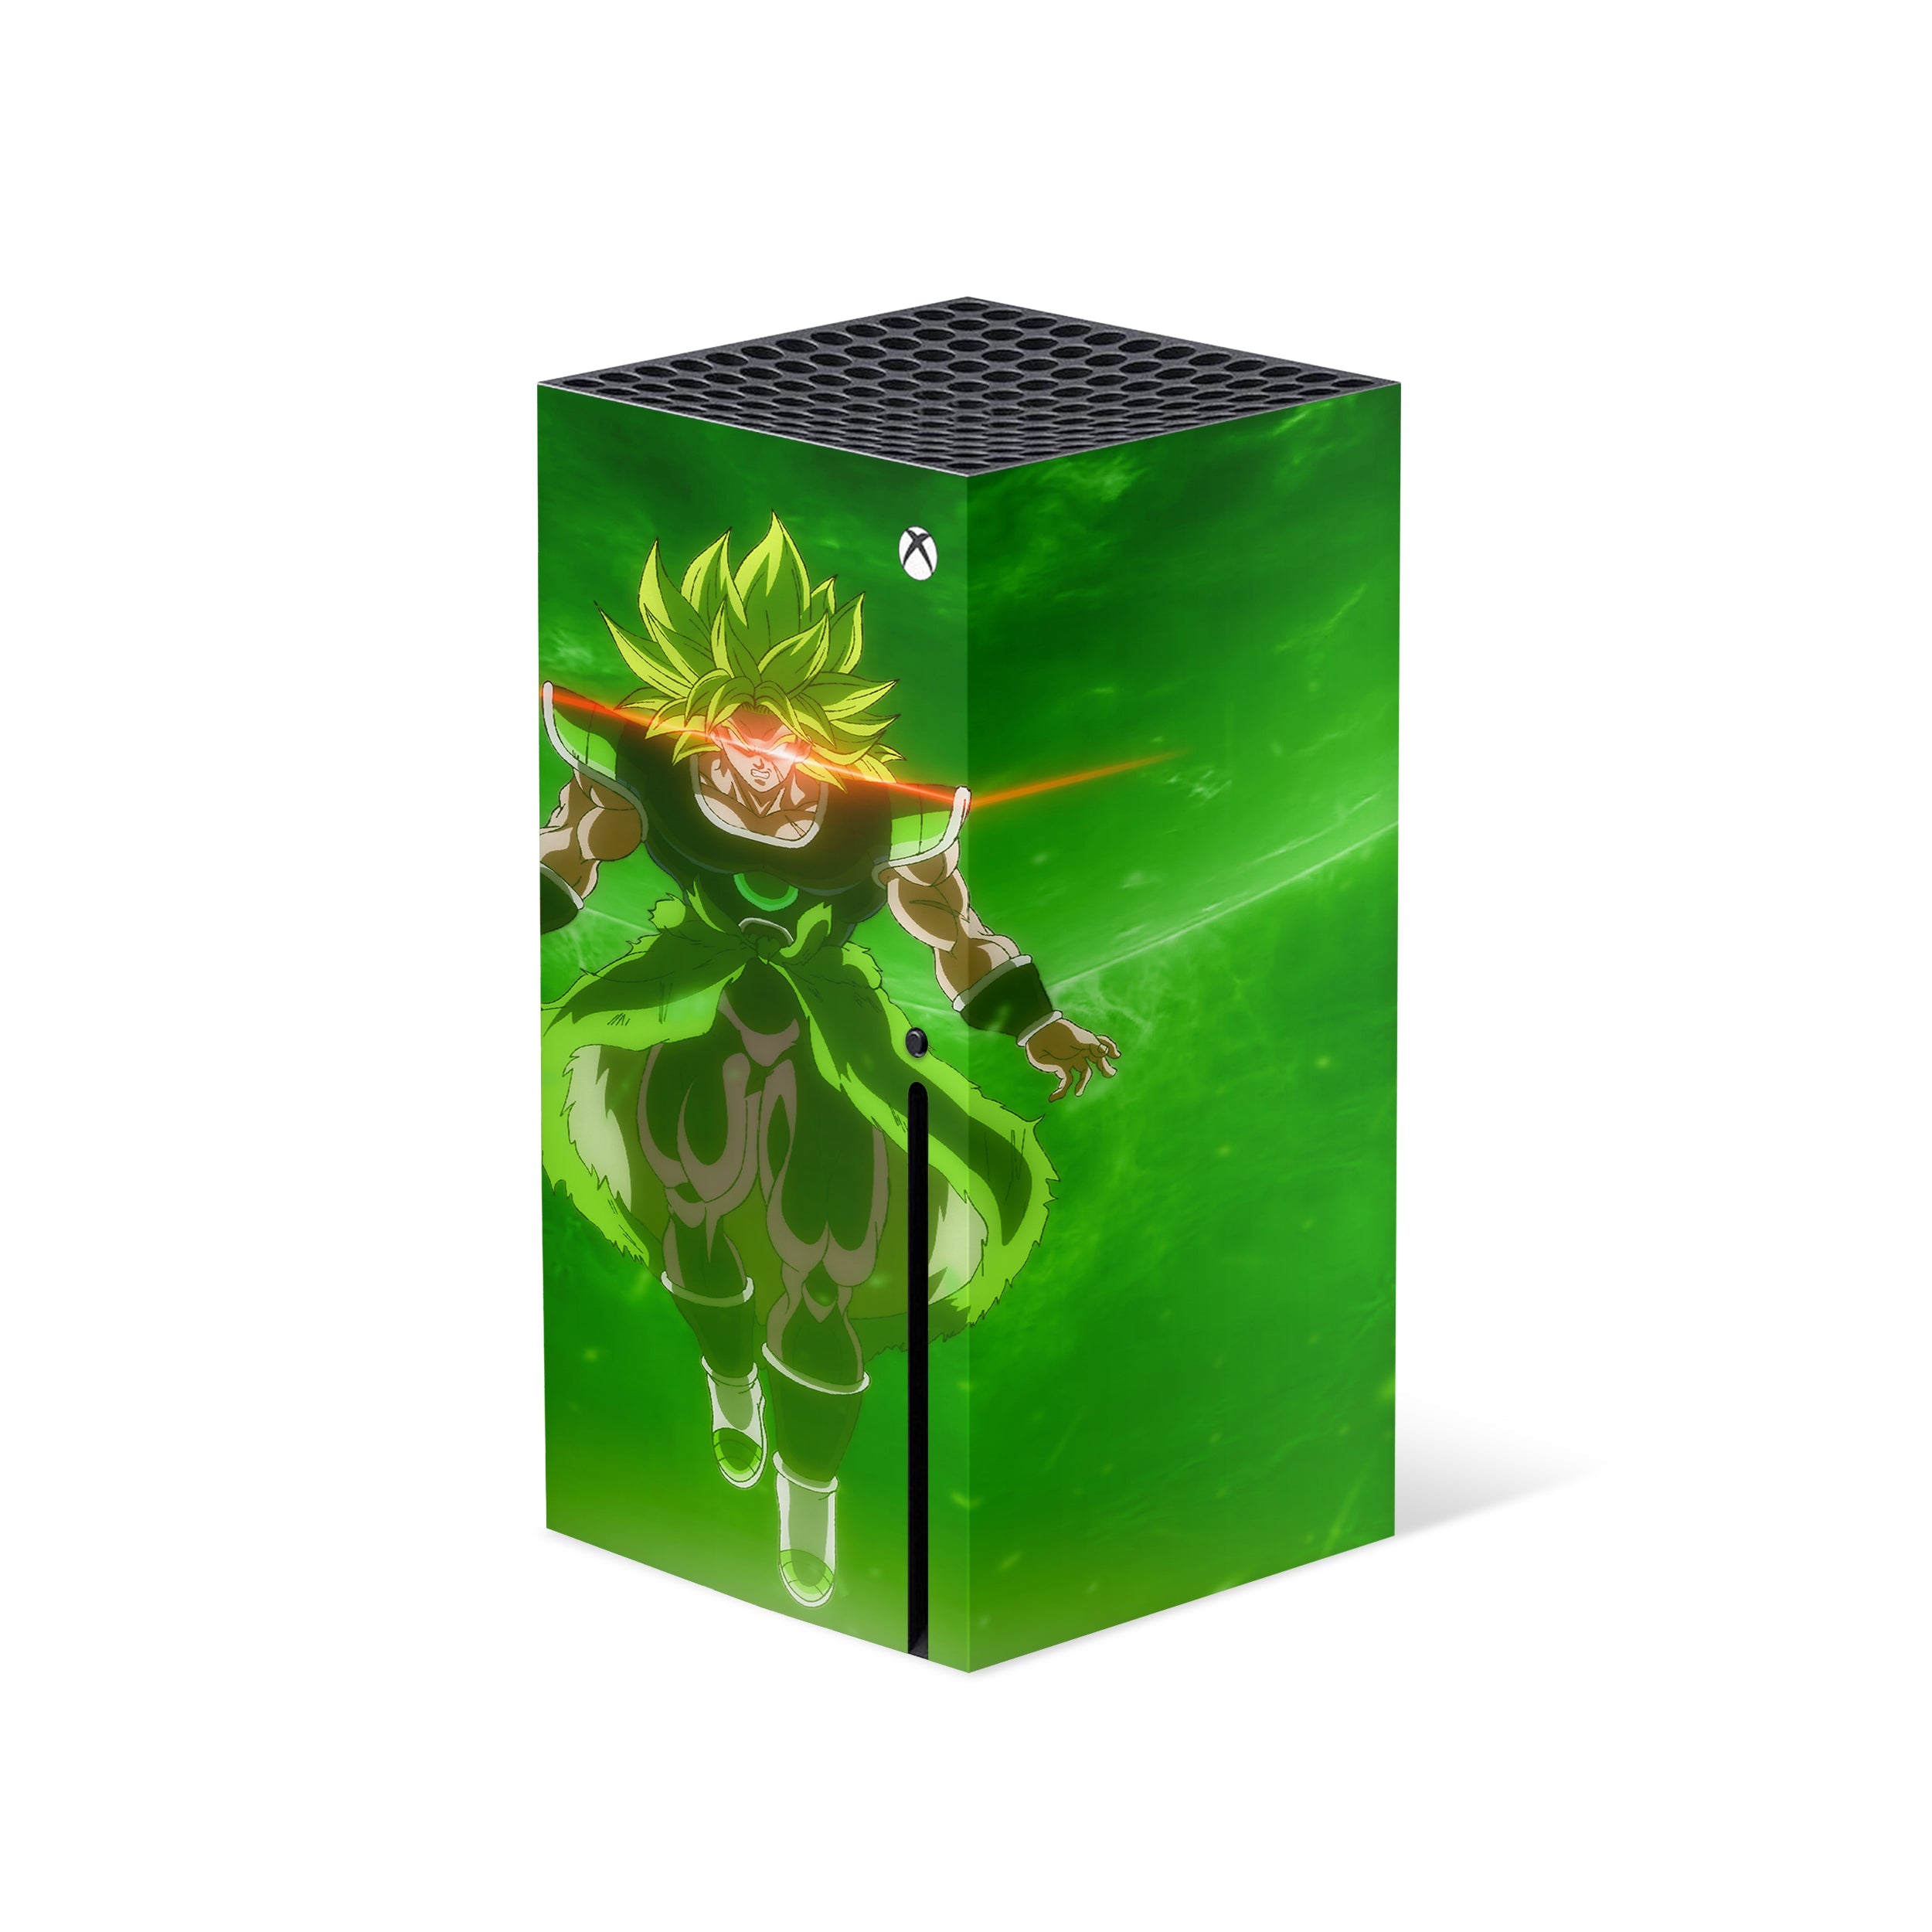 A video game skin featuring a Dragon Ball Super Broly design for the Xbox Series X.